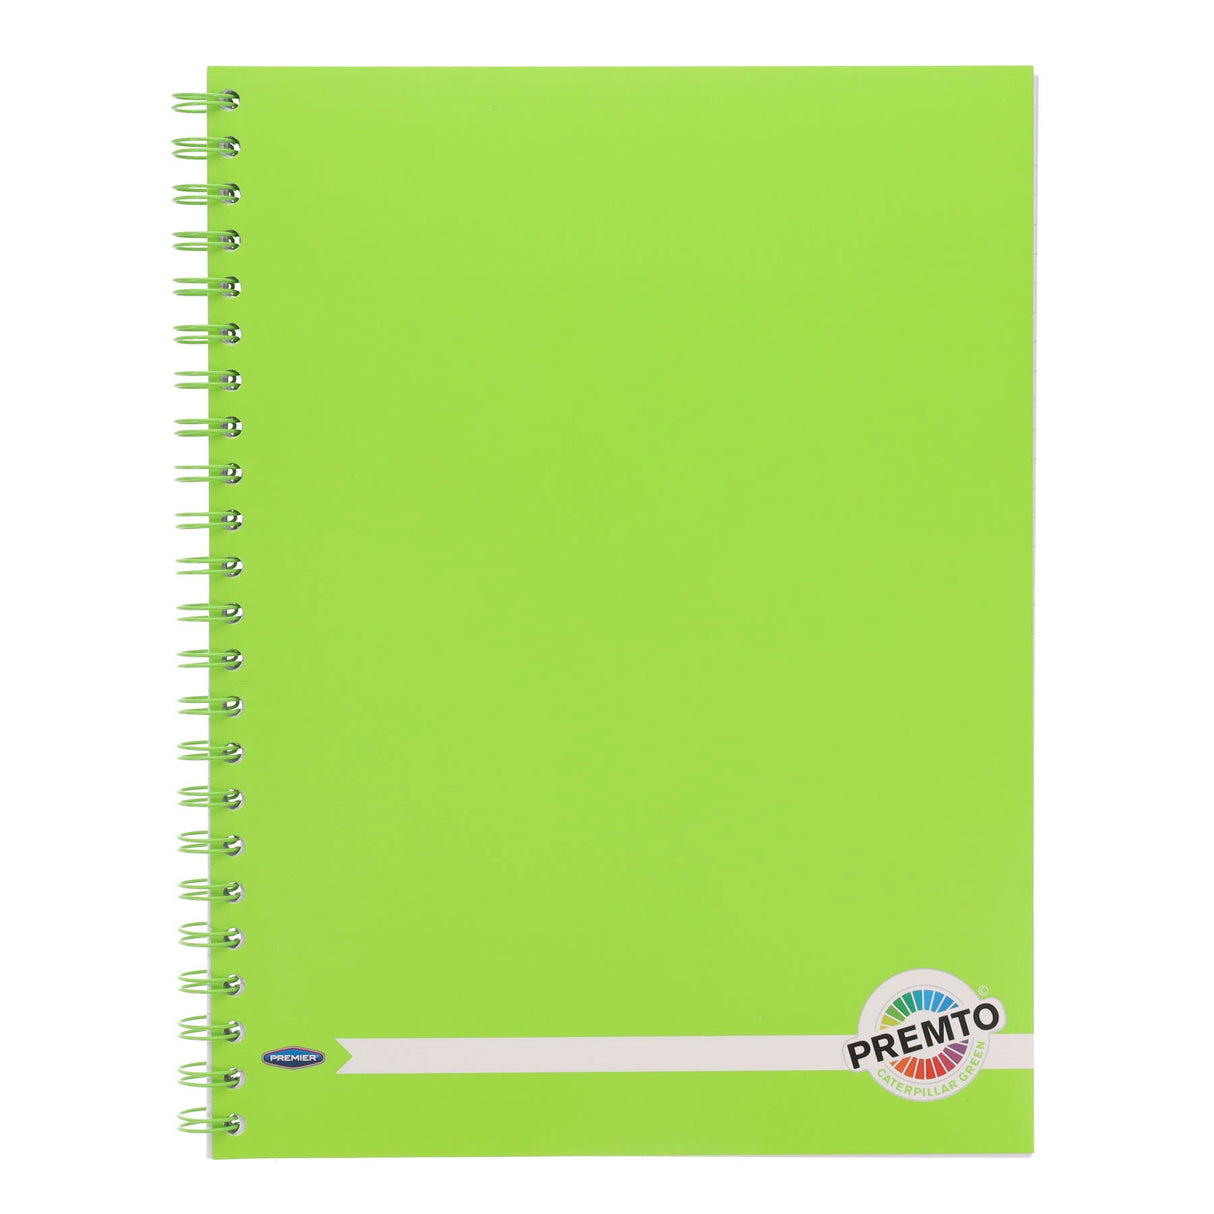 Premto A4 Wiro Notebook PP - 200 Pages - Caterpillar Green | Stationery Shop UK